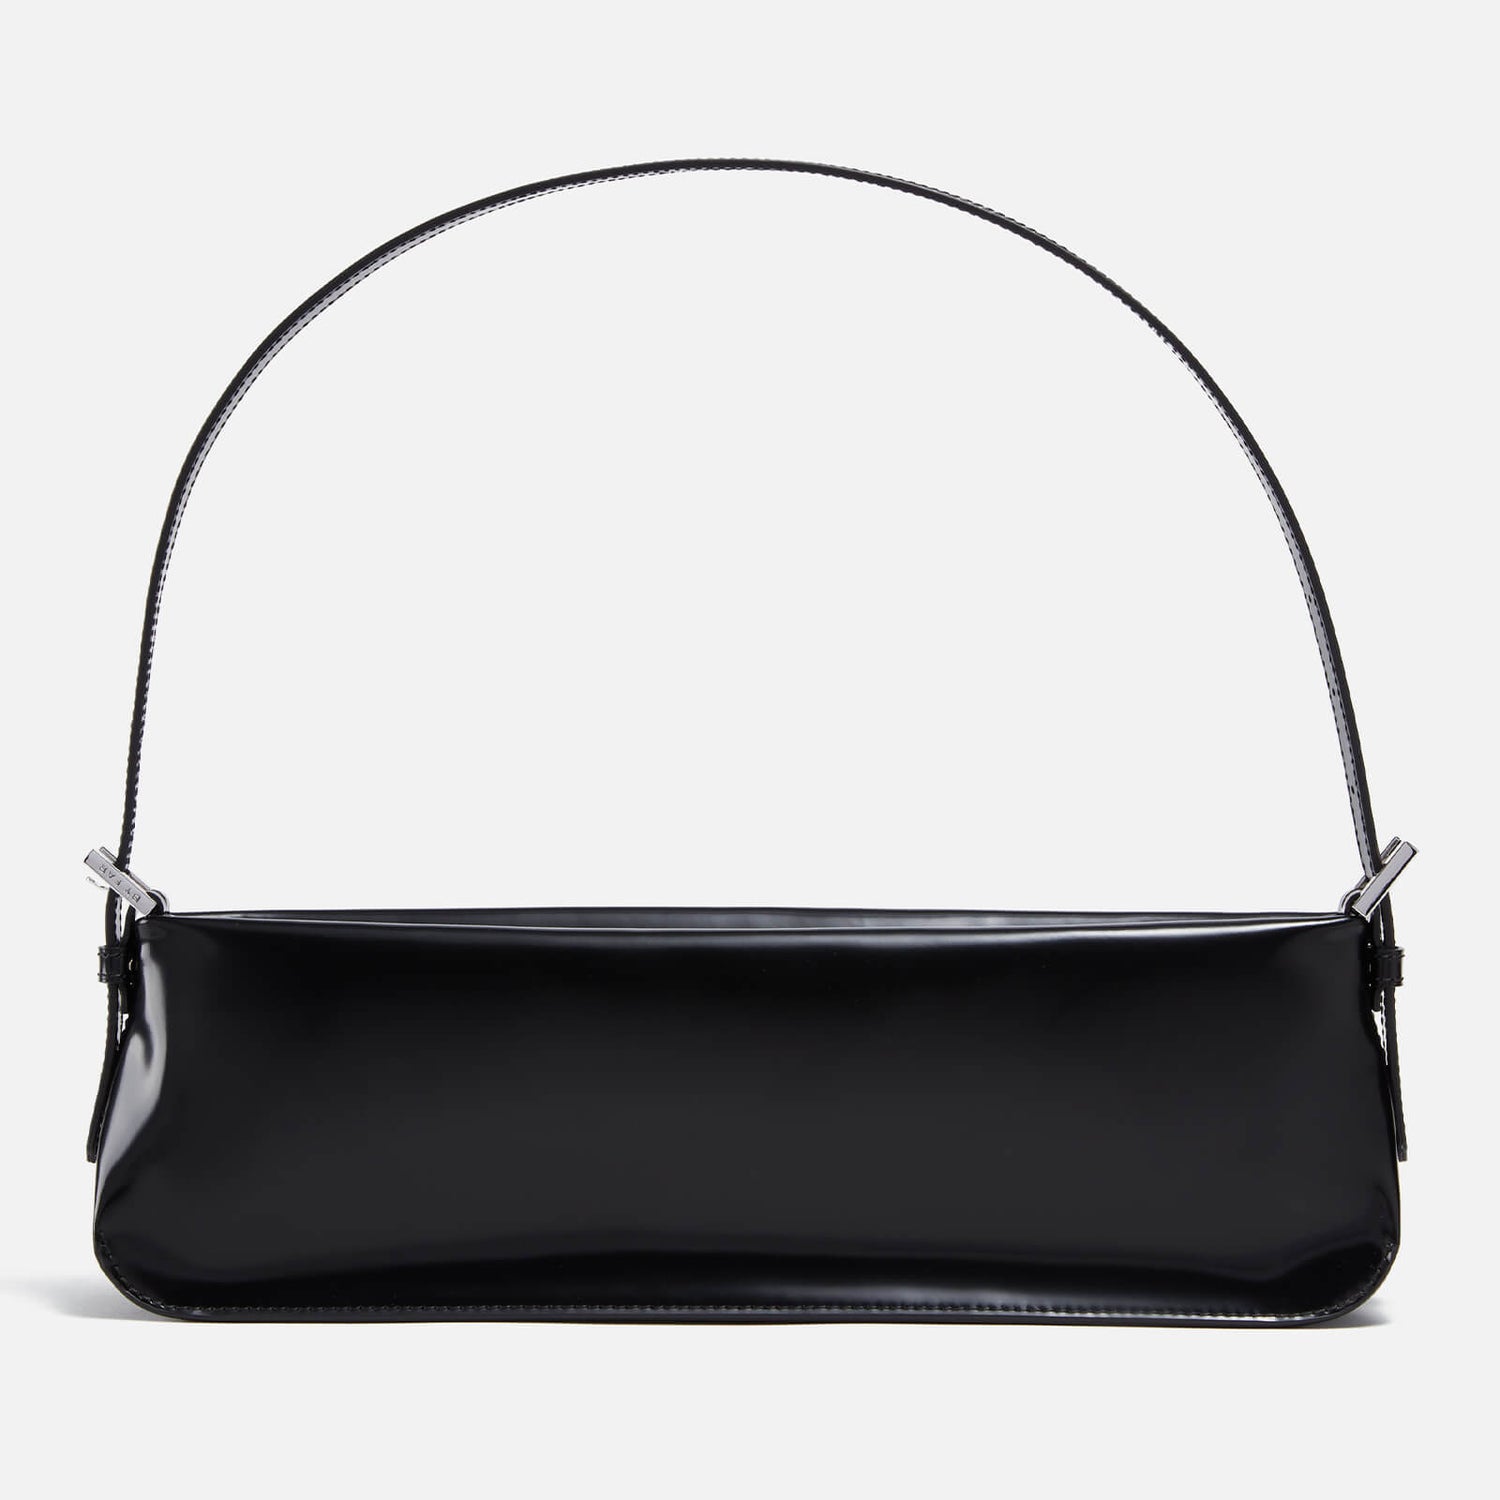 BY FAR Dulce Patent-Leather Shoulder Bag